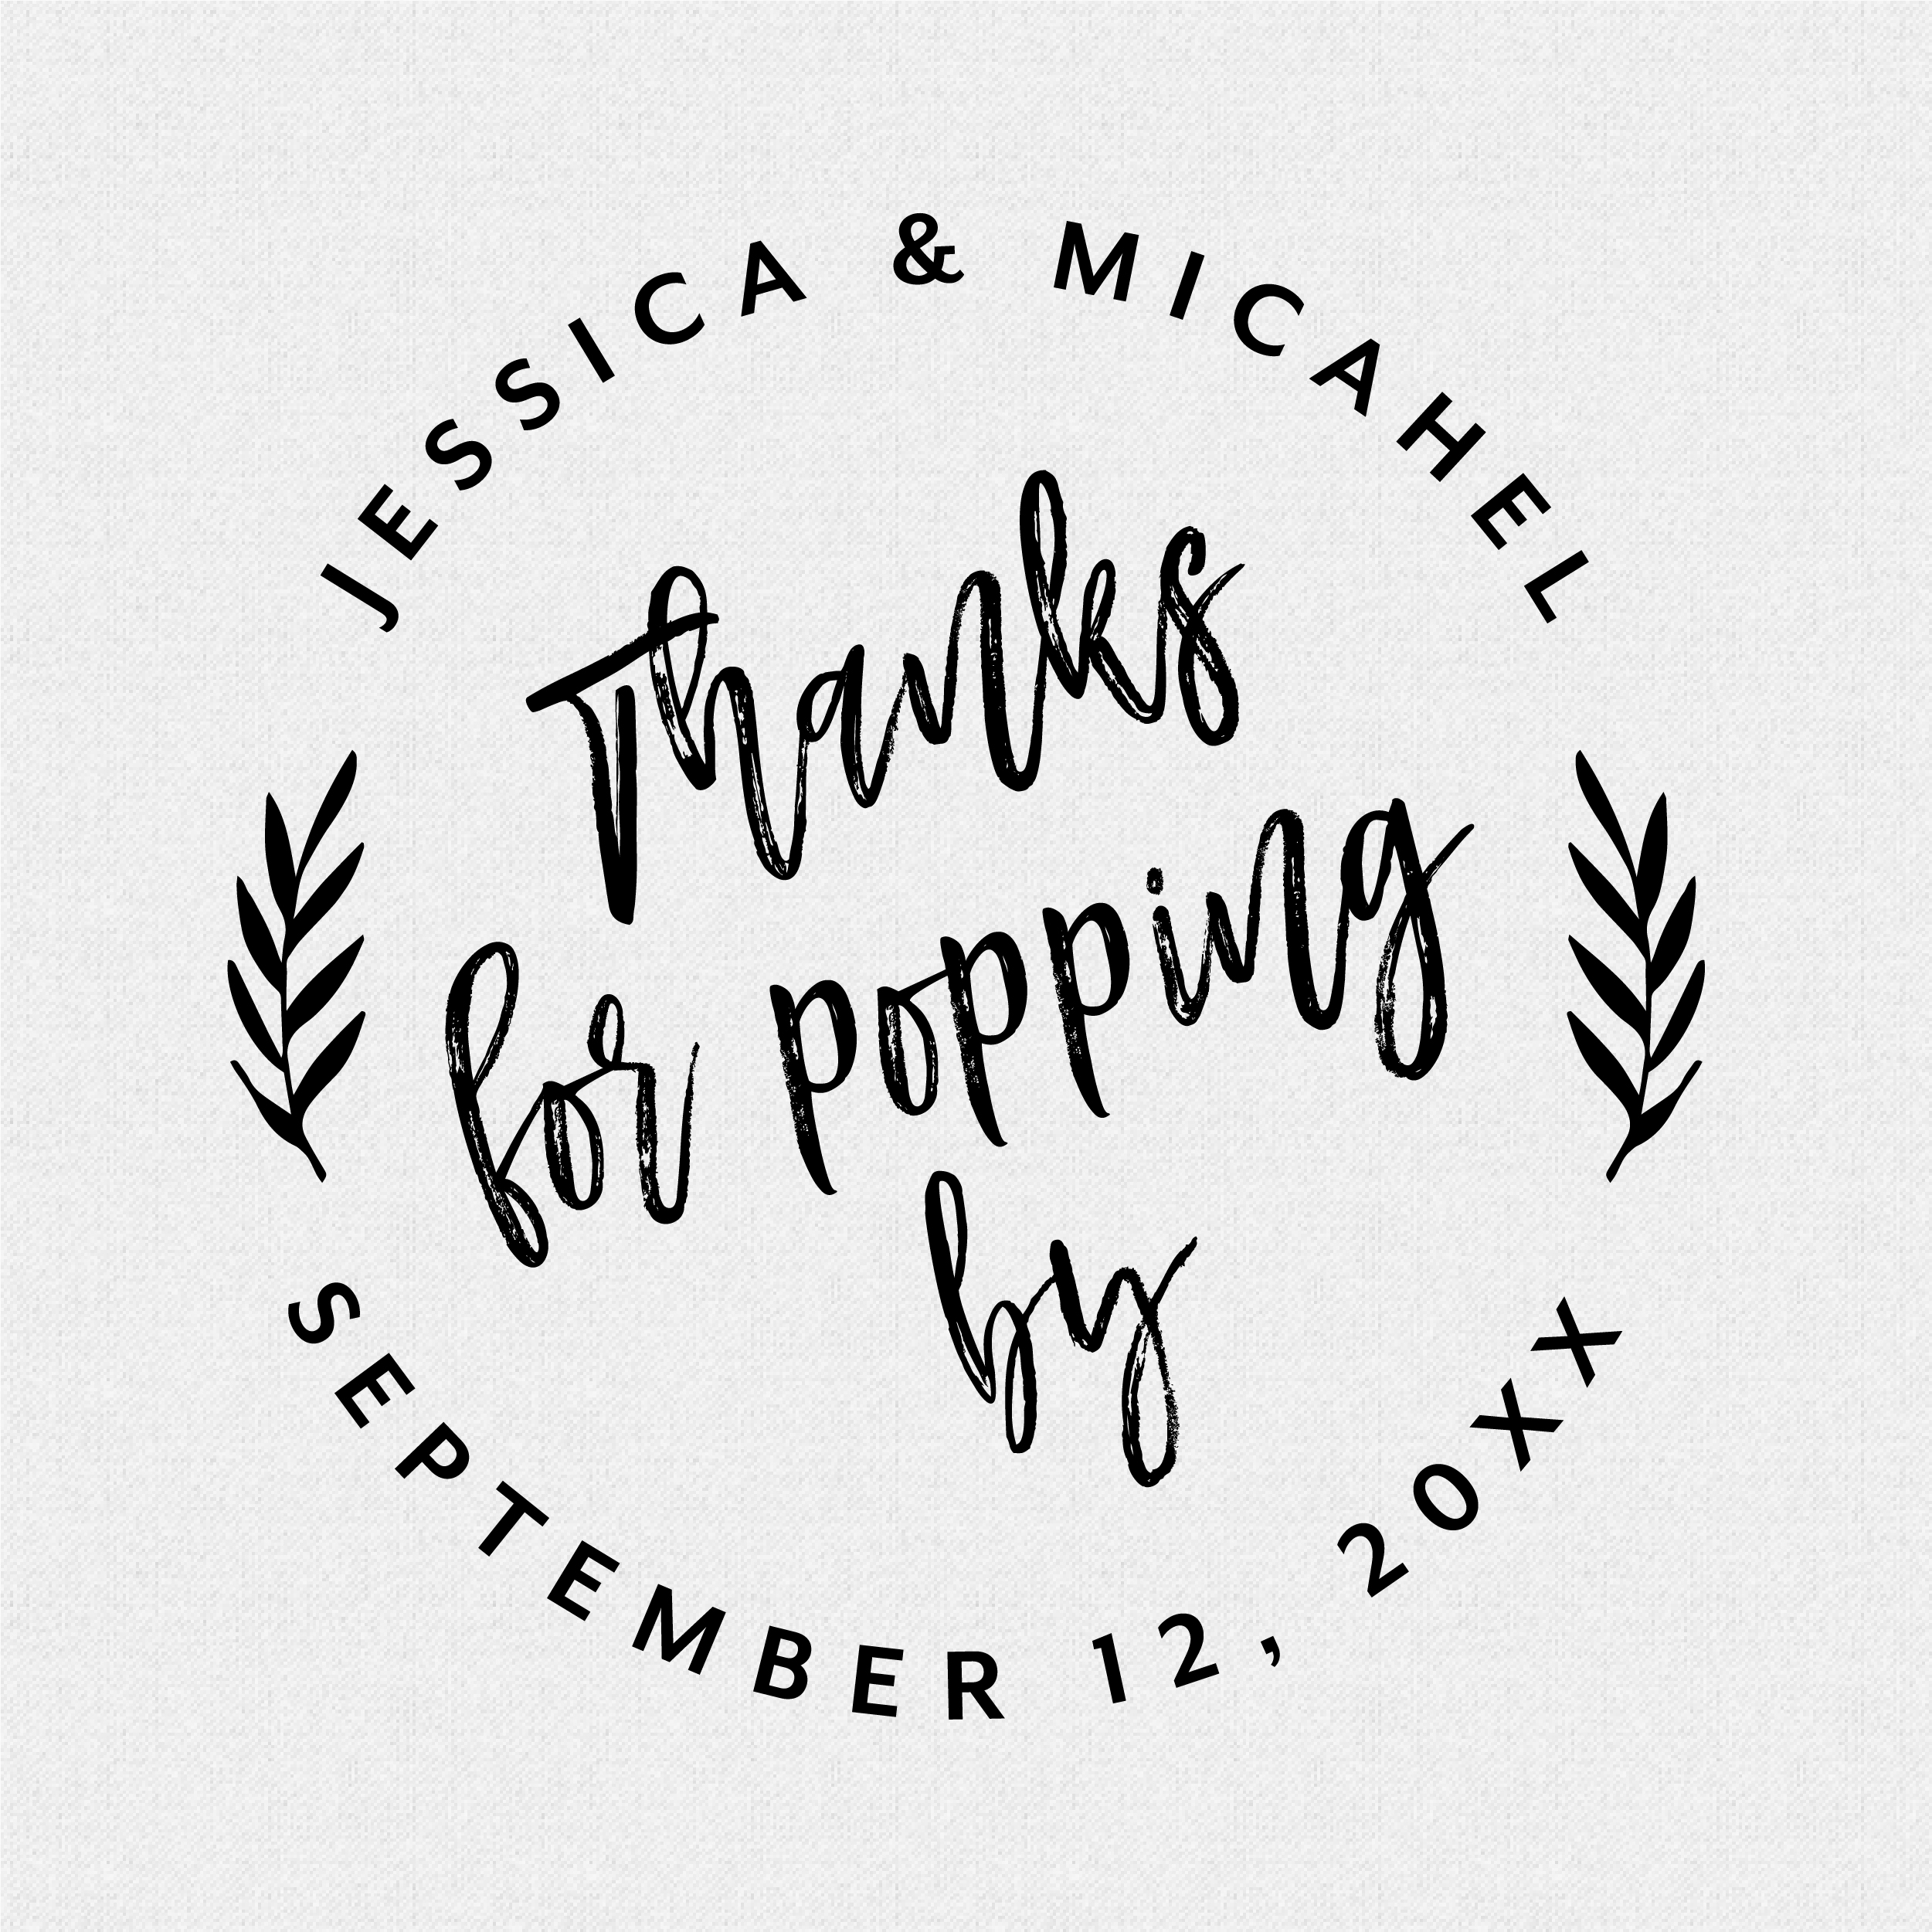 Best Day Ever Stamp Personalized Rubber Stamp Wedding Favors 